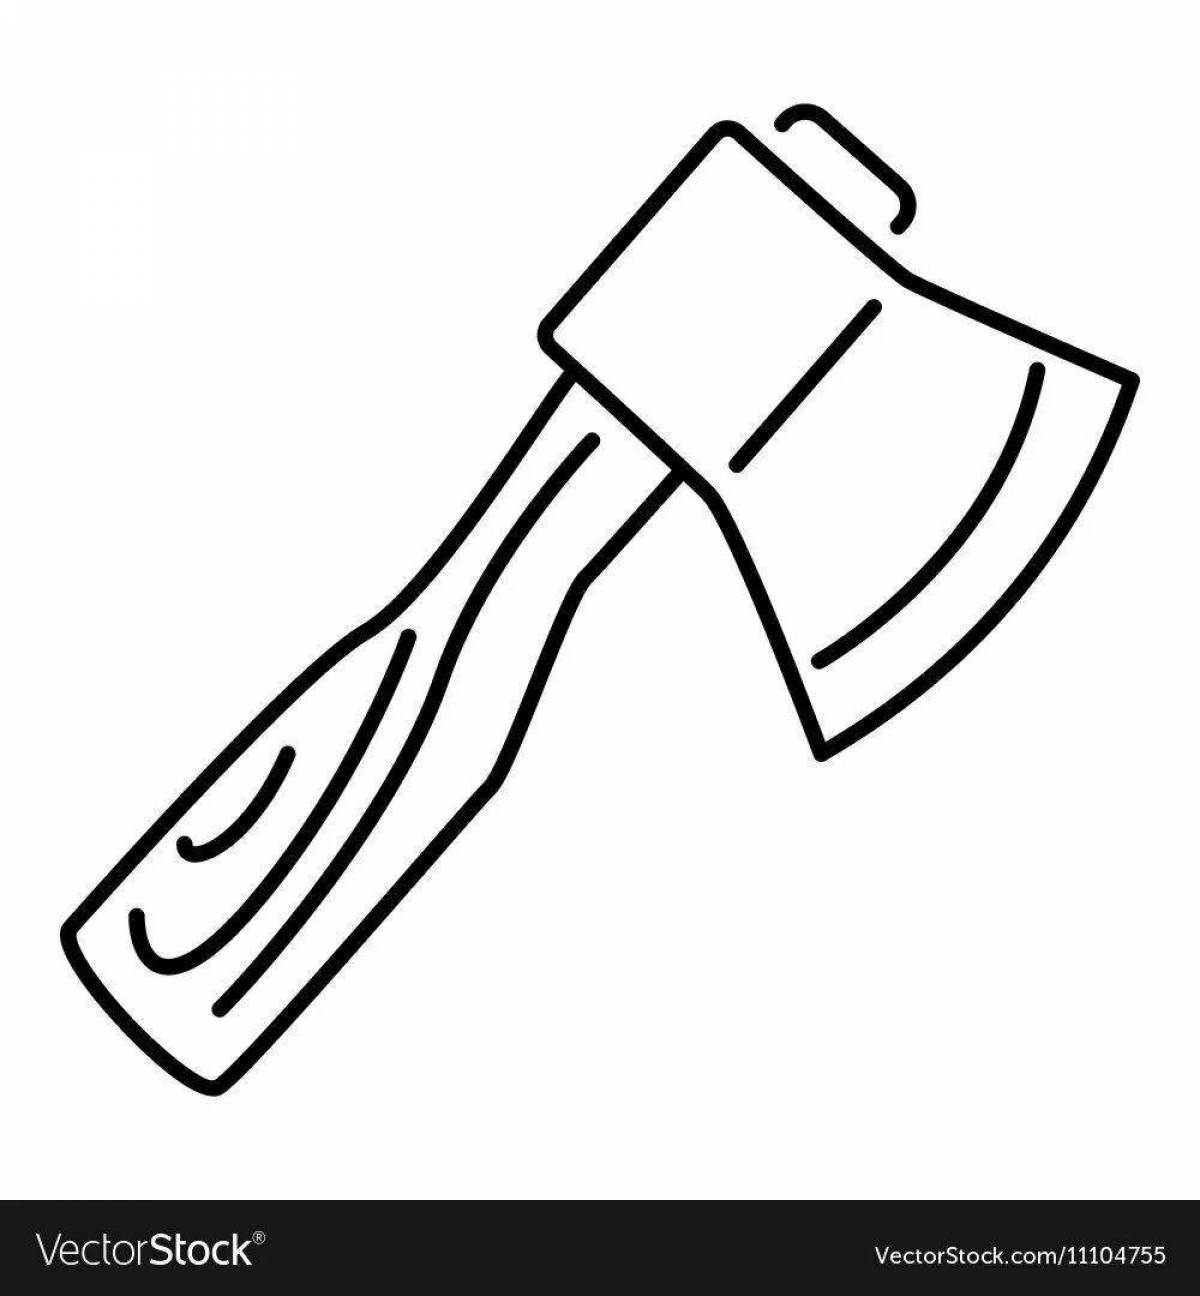 Living ax coloring page for kids